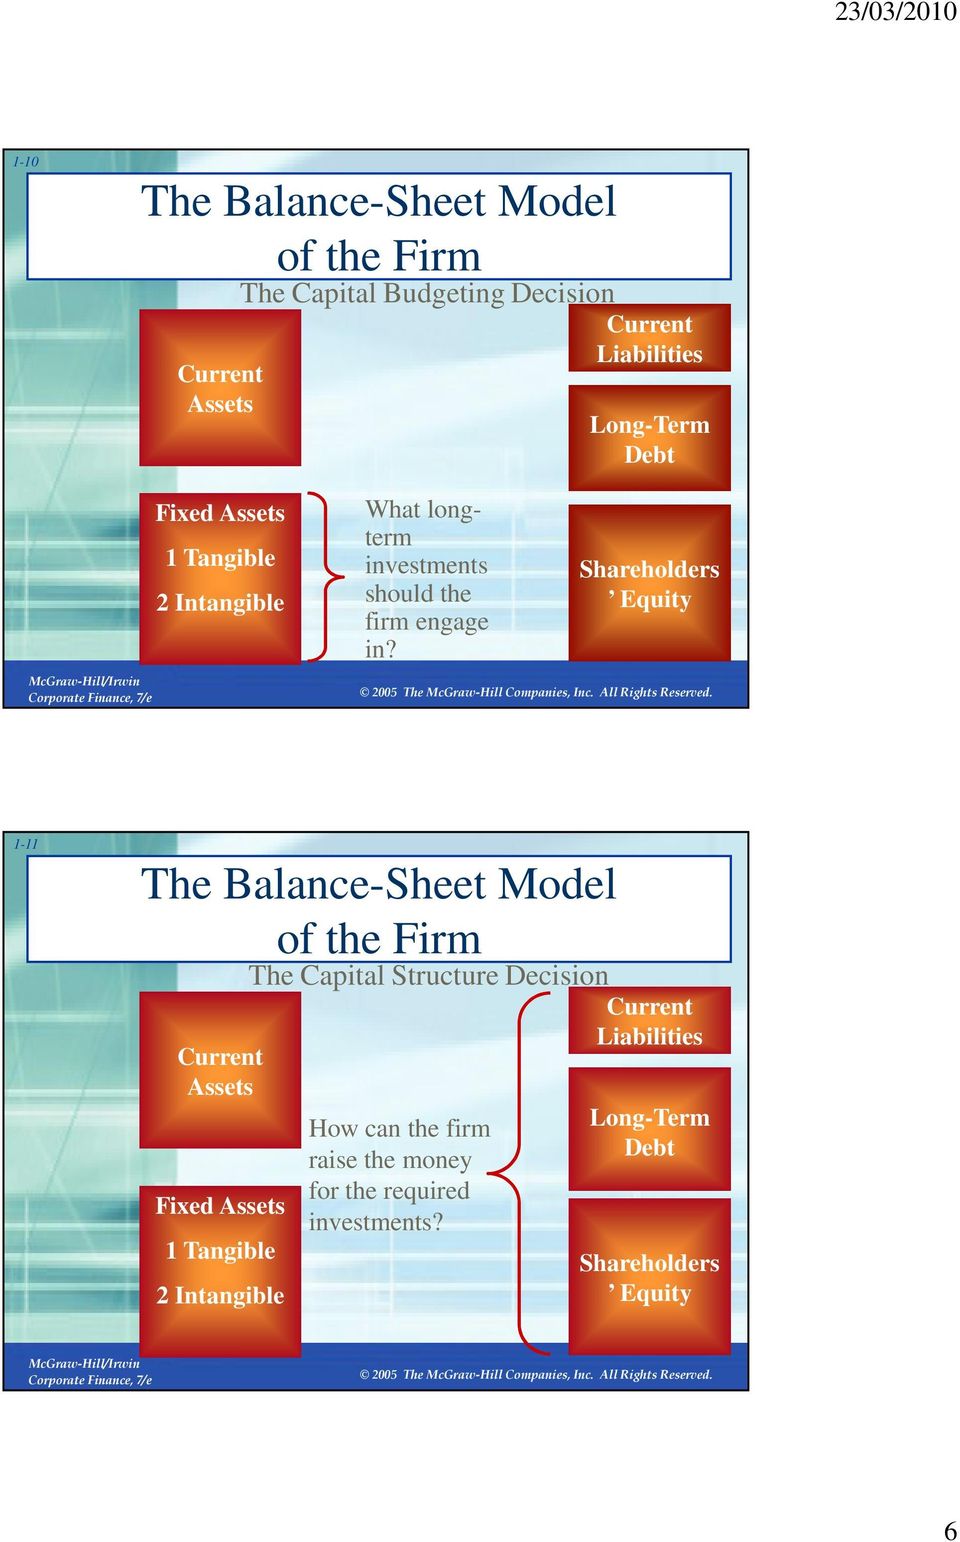 Shareholders Equity 1-11 The Balance-Sheet Model of the Firm Current Assets Fixed Assets 1 Tangible 2 Intangible The